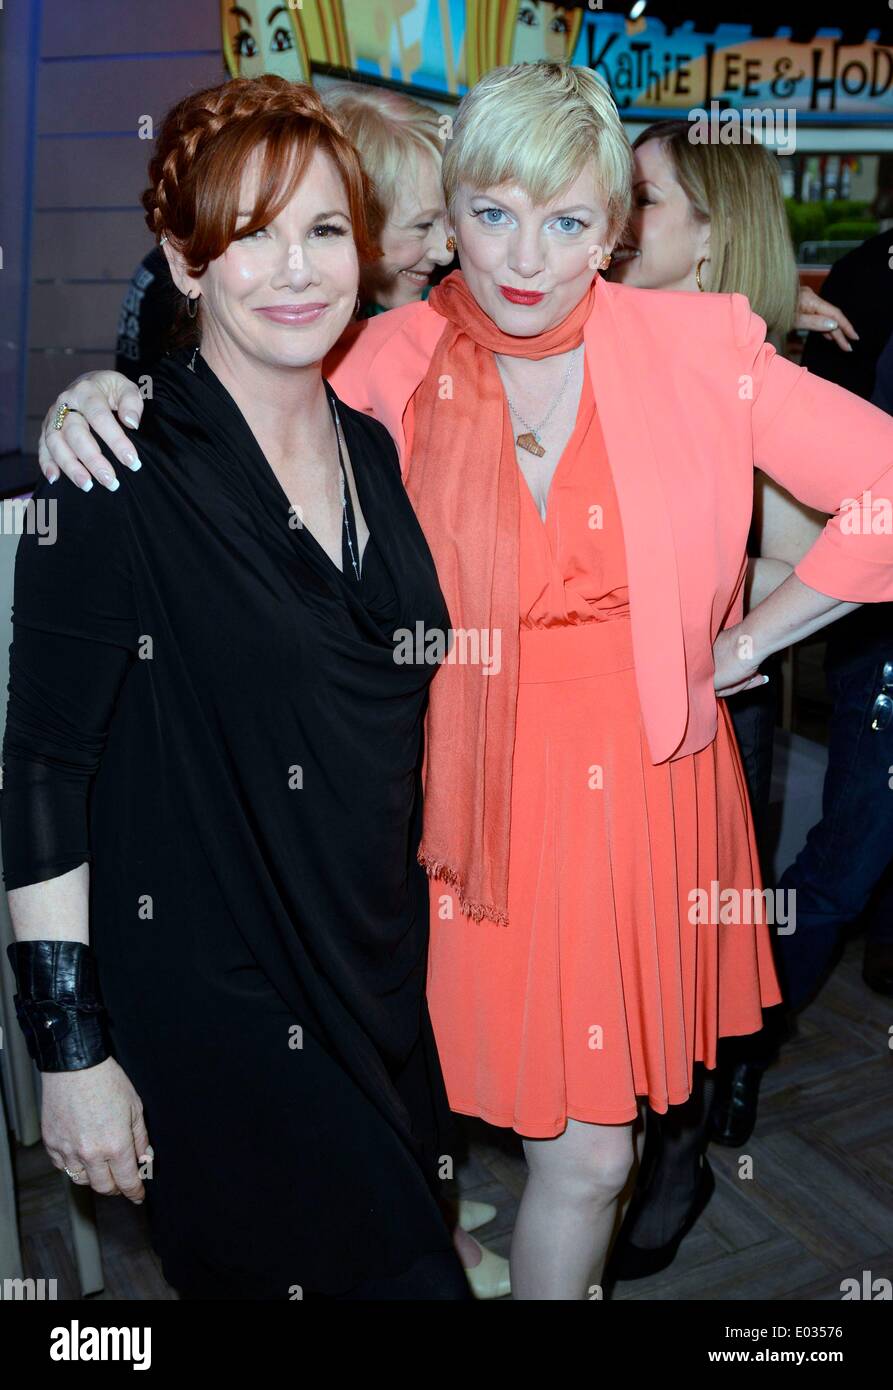 New York, NY, USA. 30th Apr, 2014. Melissa Gilbert, Alison Arngrim at talk  show appearance for LITTLE HOUSE ON THE PRAIRIE Cast Reunion at the NBC  Today Show, Rockefeller Plaza, New York,